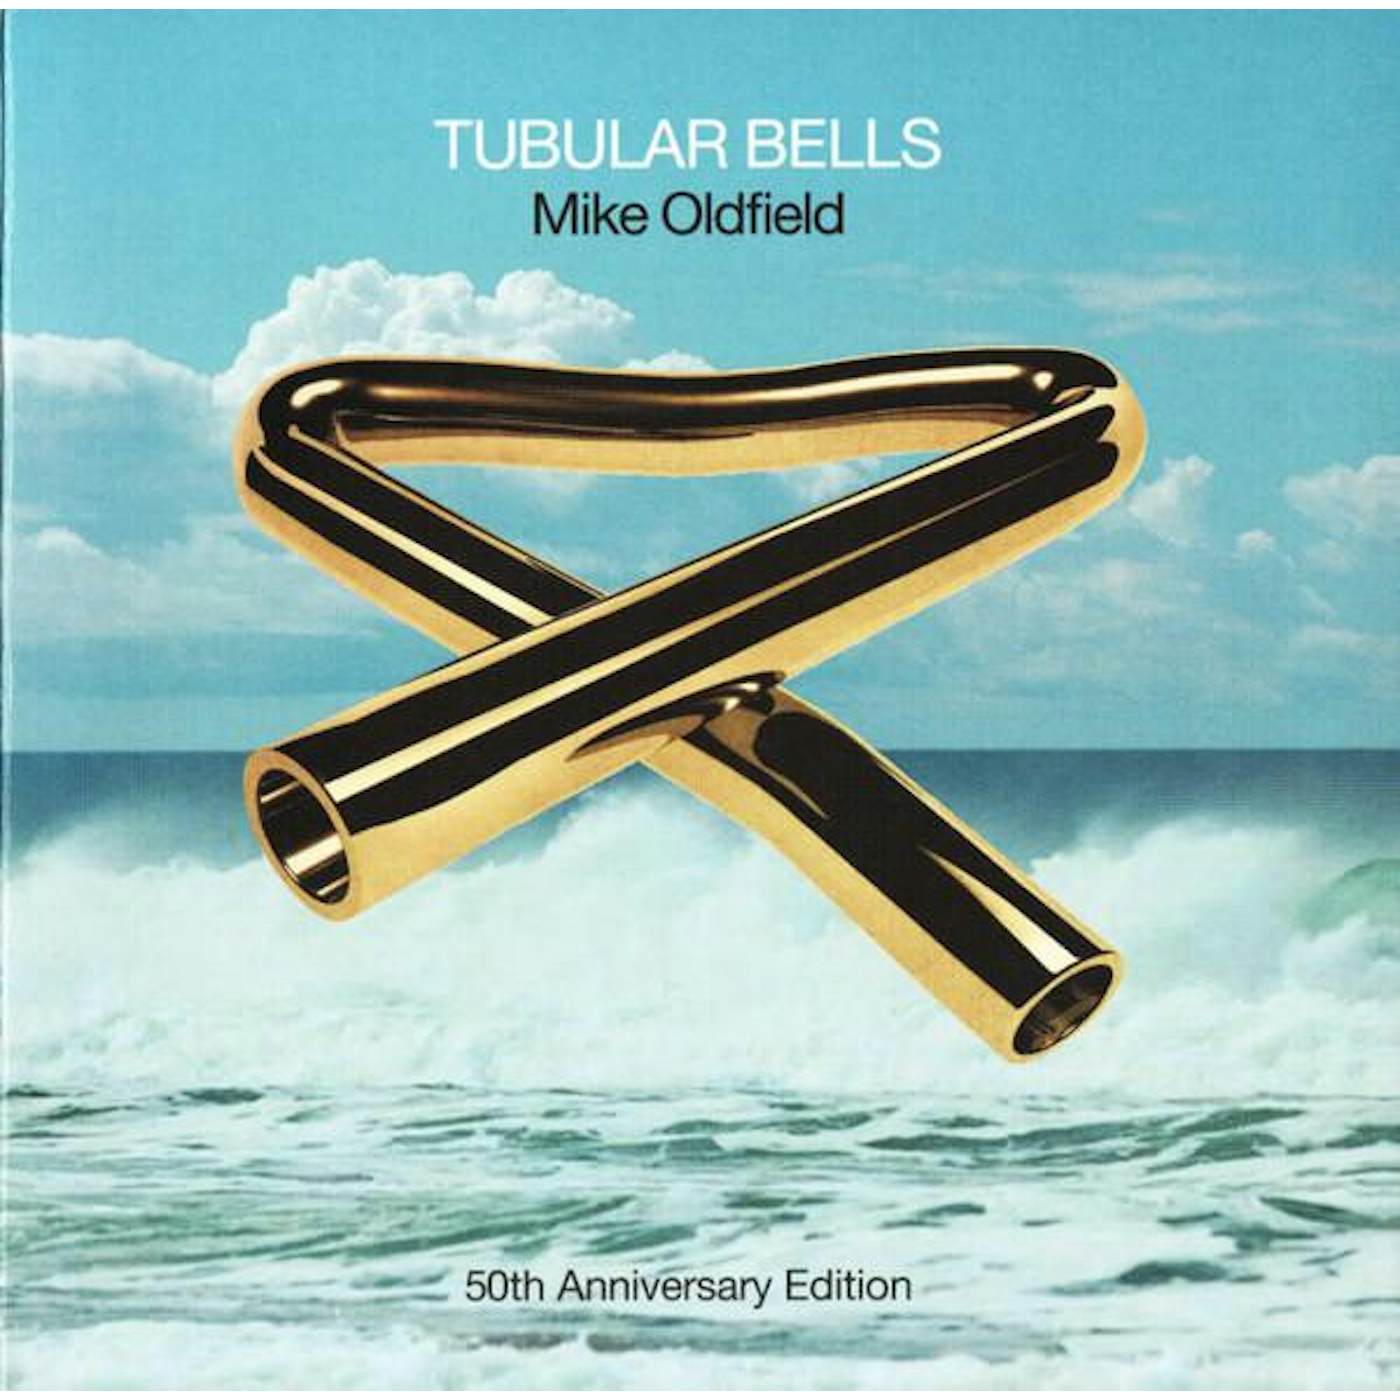 Mike Oldfield TUBULAR BELLS (50TH ANNIVERSARY EDITION) CD